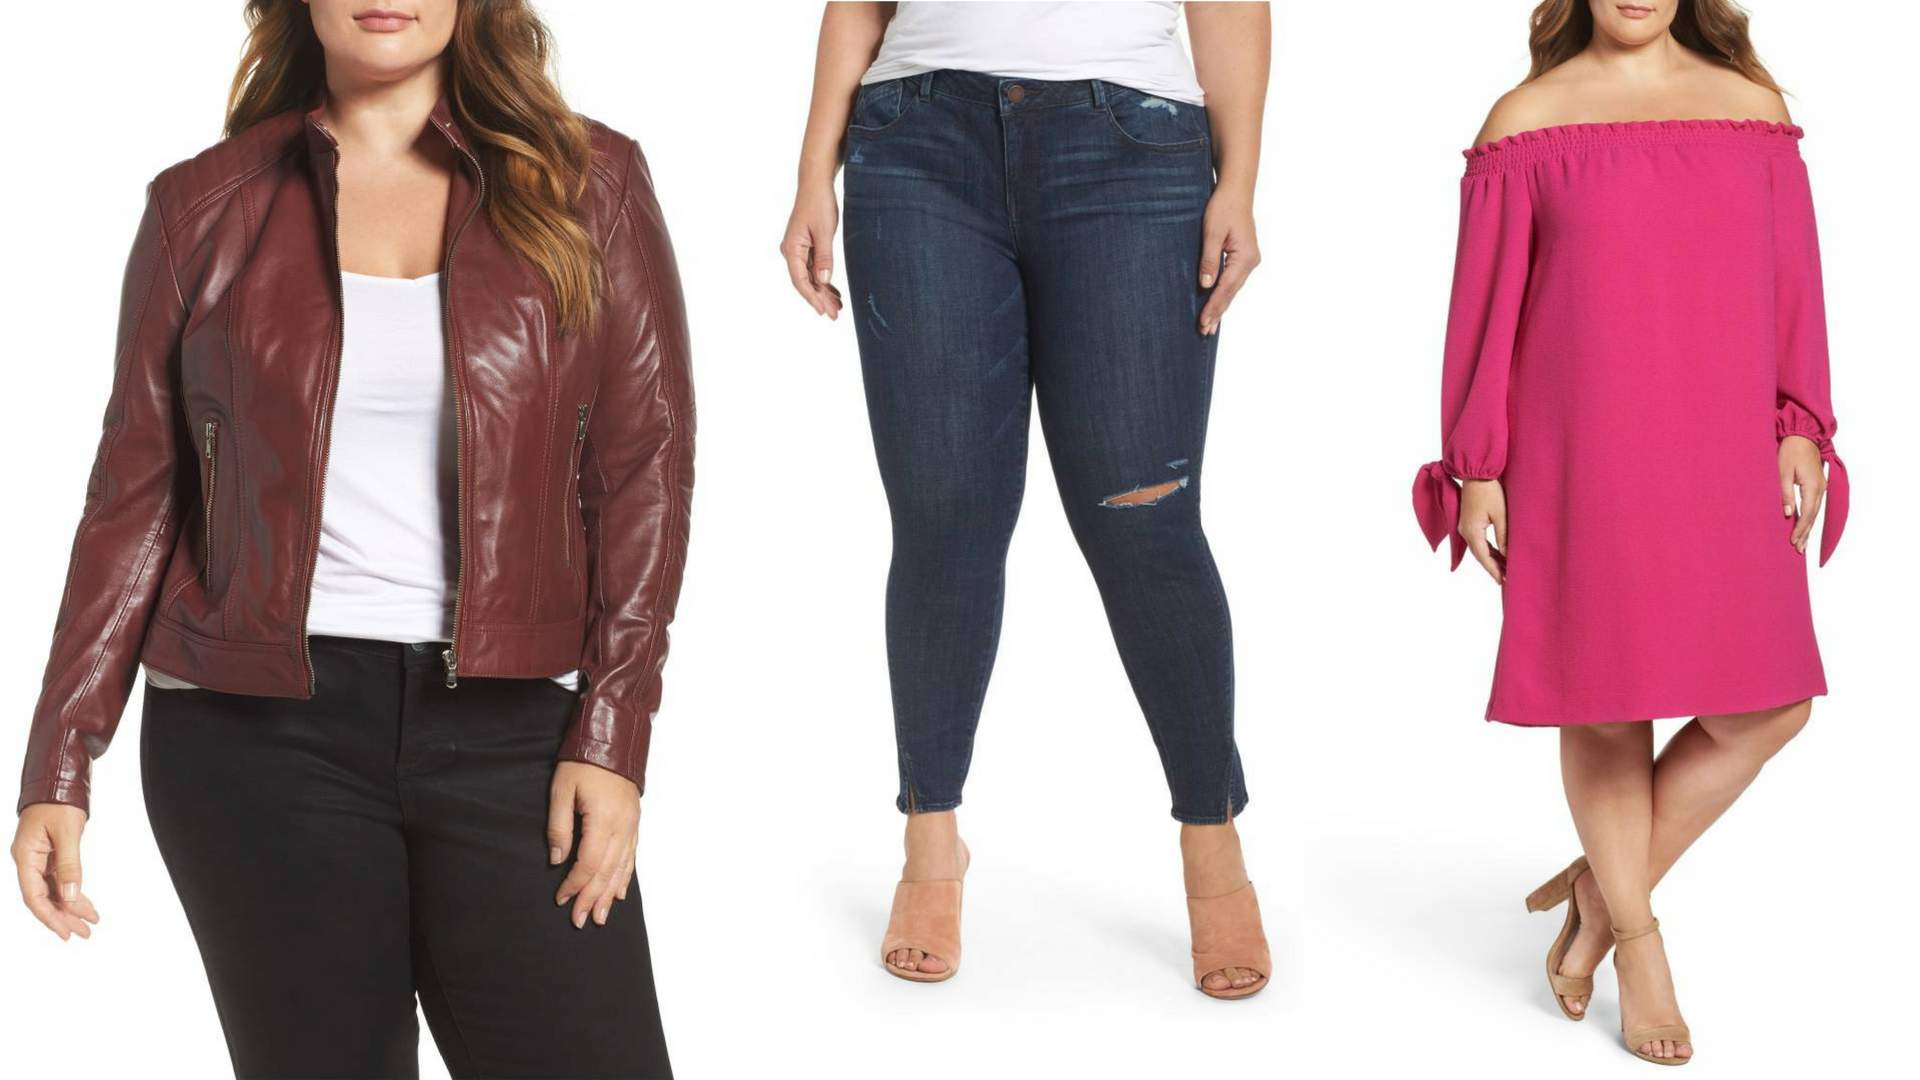 The Nordstrom Anniversay Sale Ends Sunday Here's Your Last Chance to Catch These Items On Sale